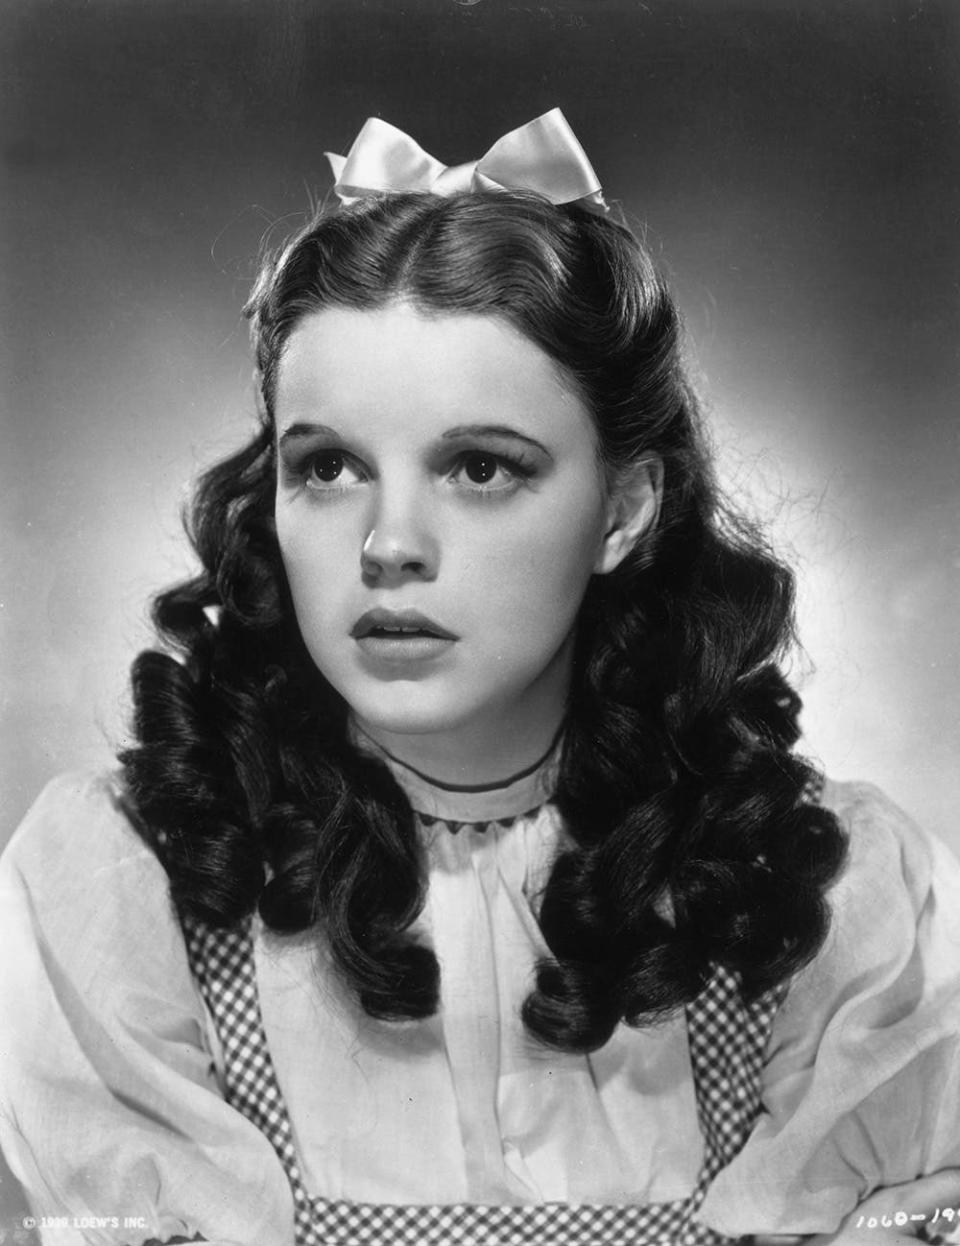 Judy Garland dressed as Dorothy from The Wizard of Oz